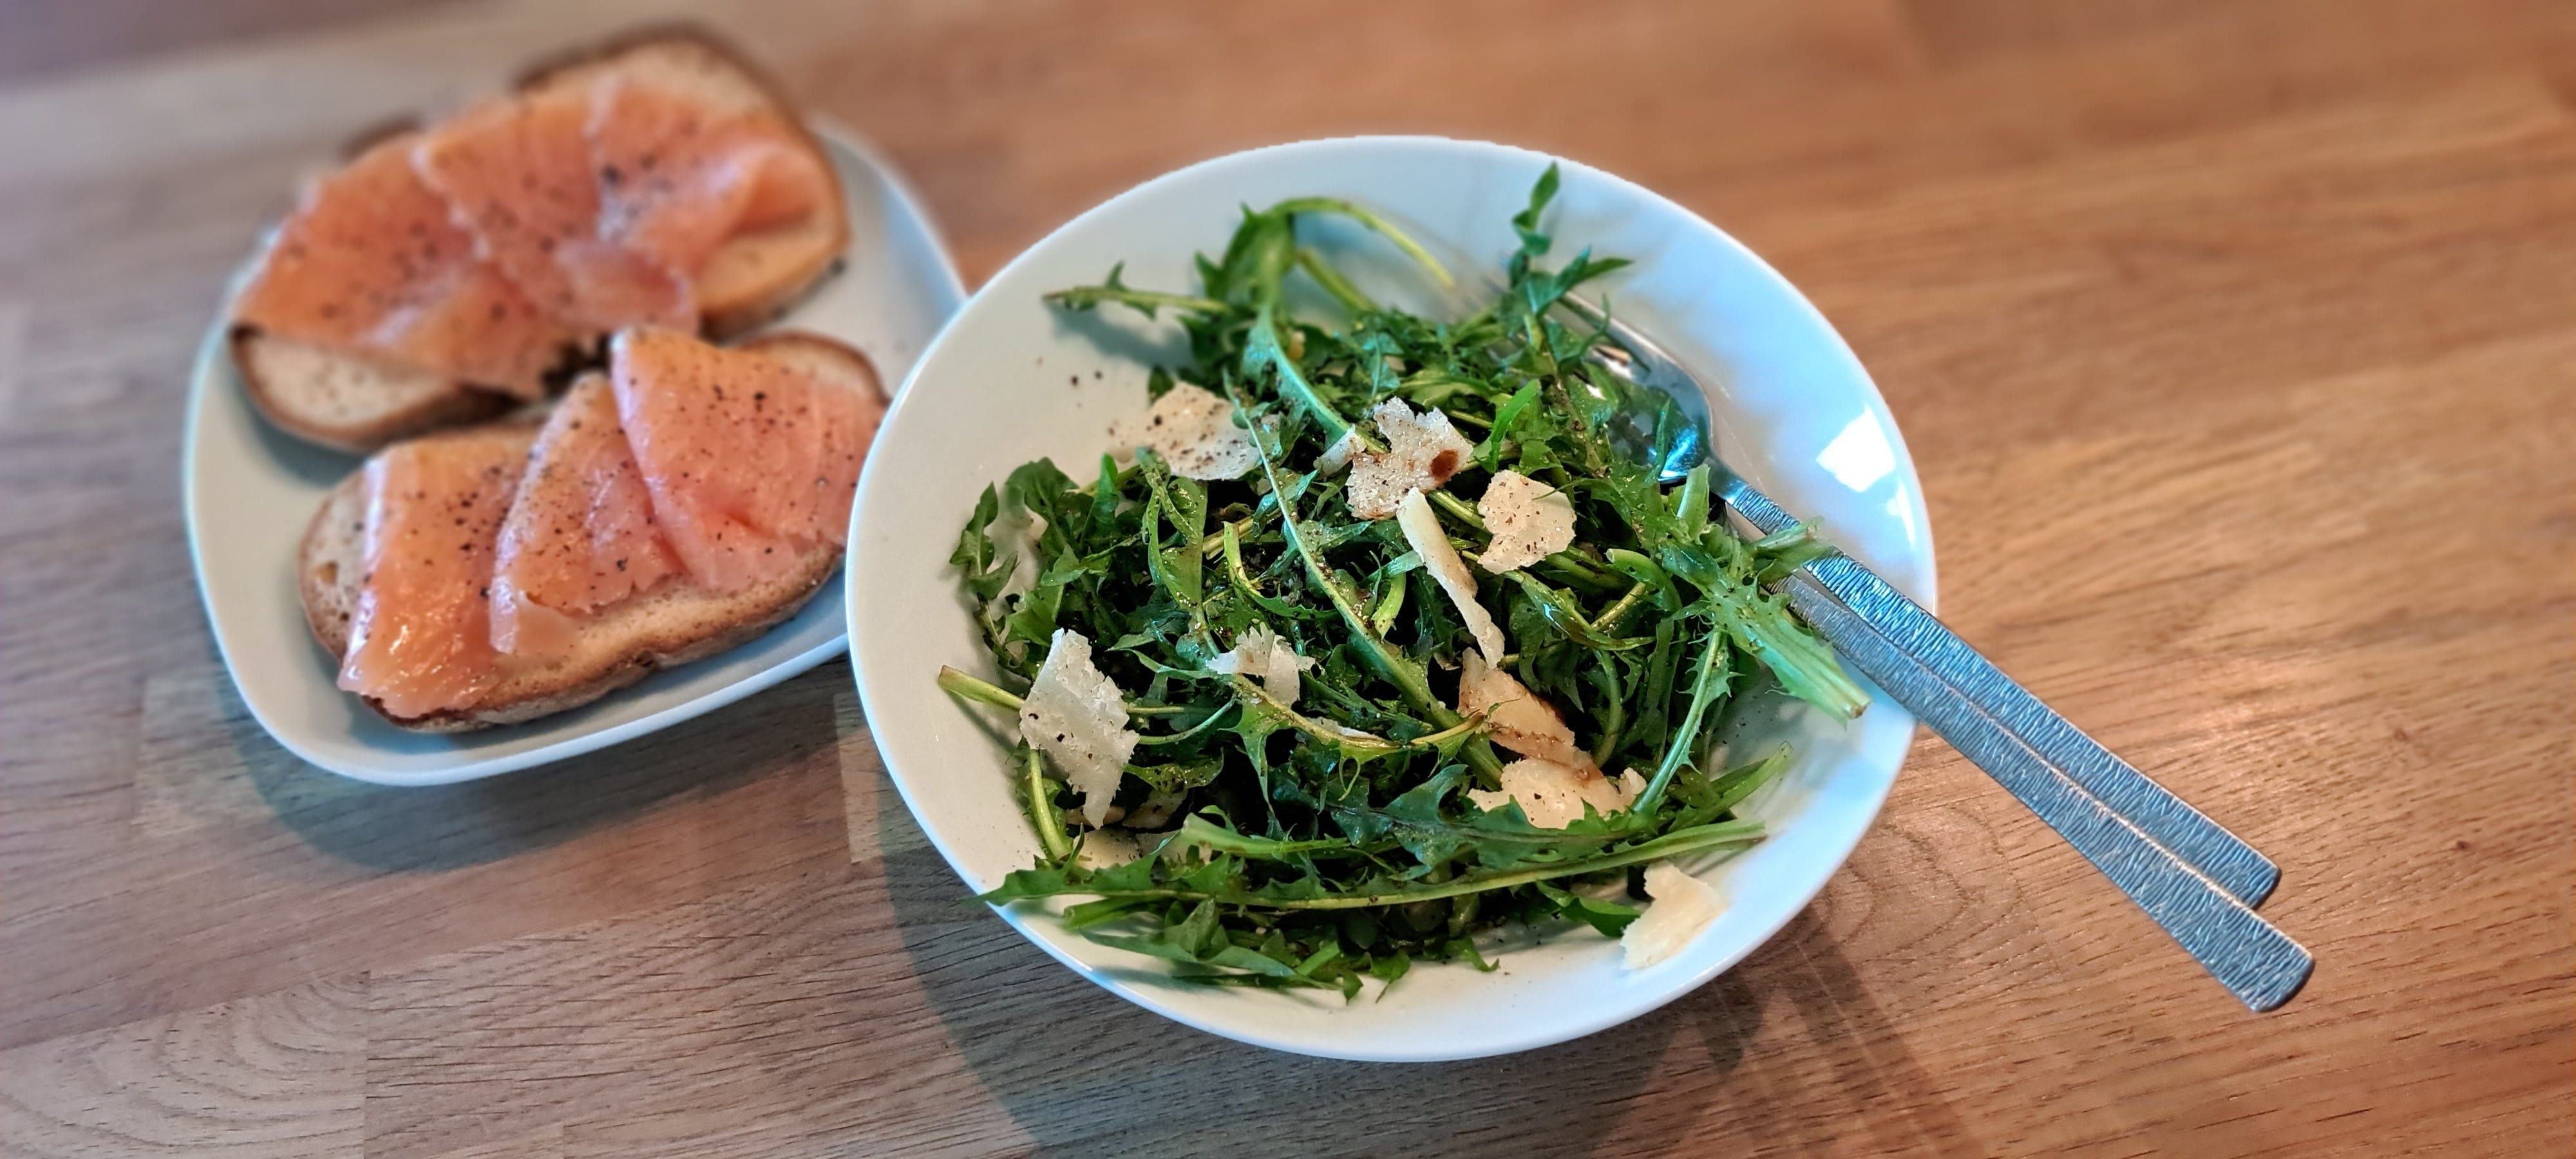 A white bowl containing a salad of jagged dandelion leaves sprinkled with salt and pepper and shavings of parmesan. Beside is a platw with toast and smoked salmon.